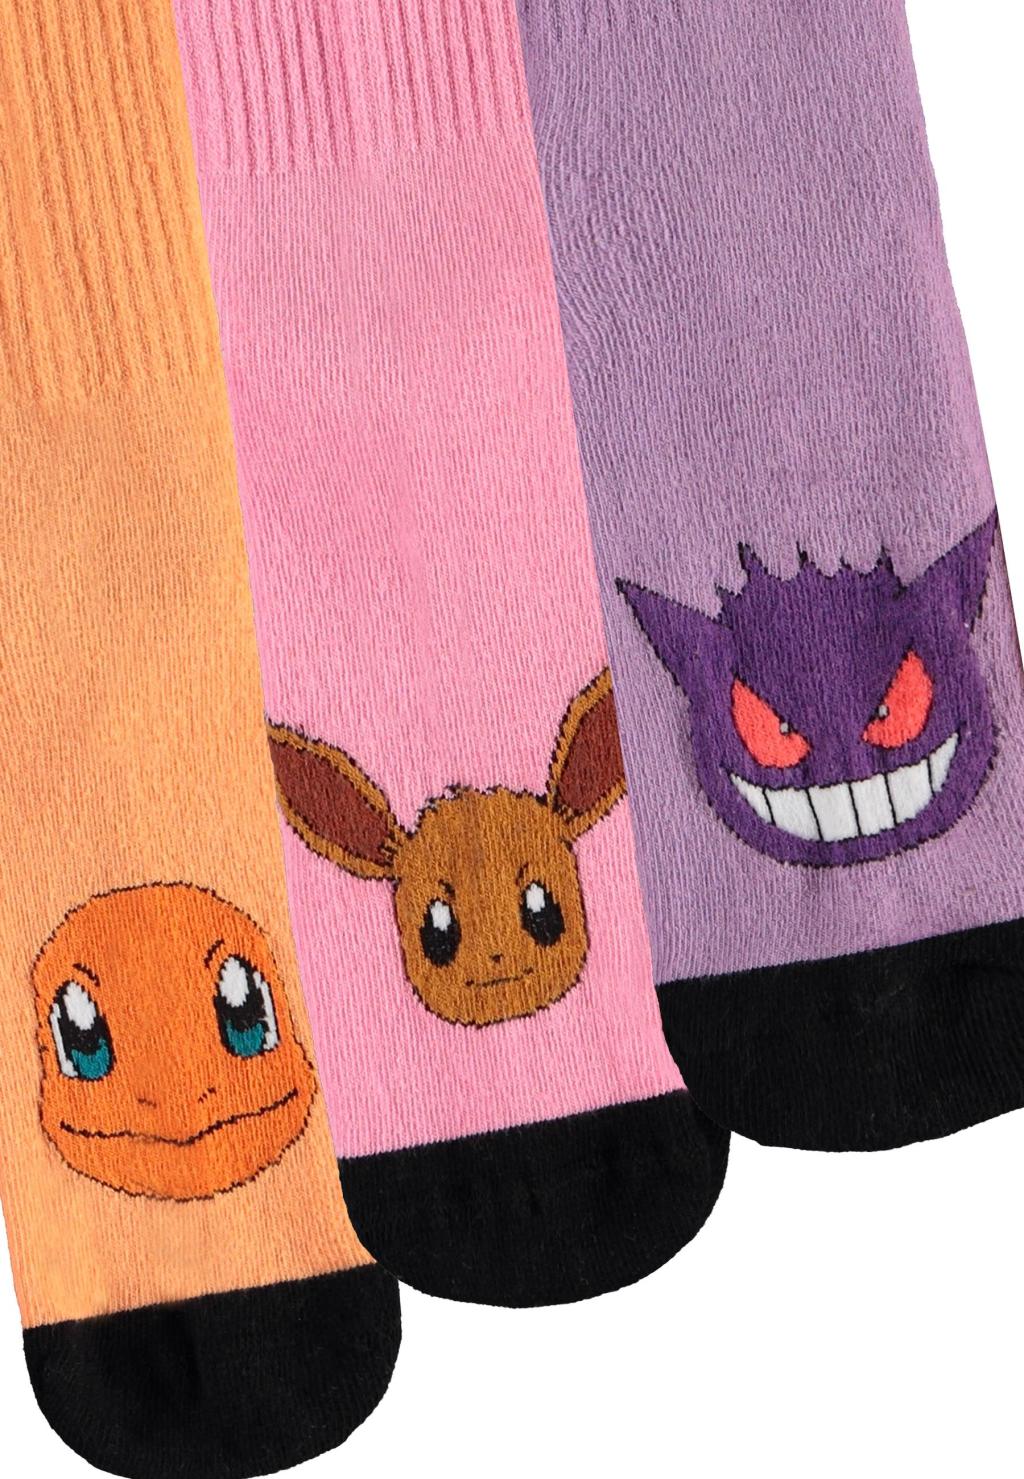 POKEMON - Trio Color - Pack of 3 pairs of Sport socks (S 3-5)